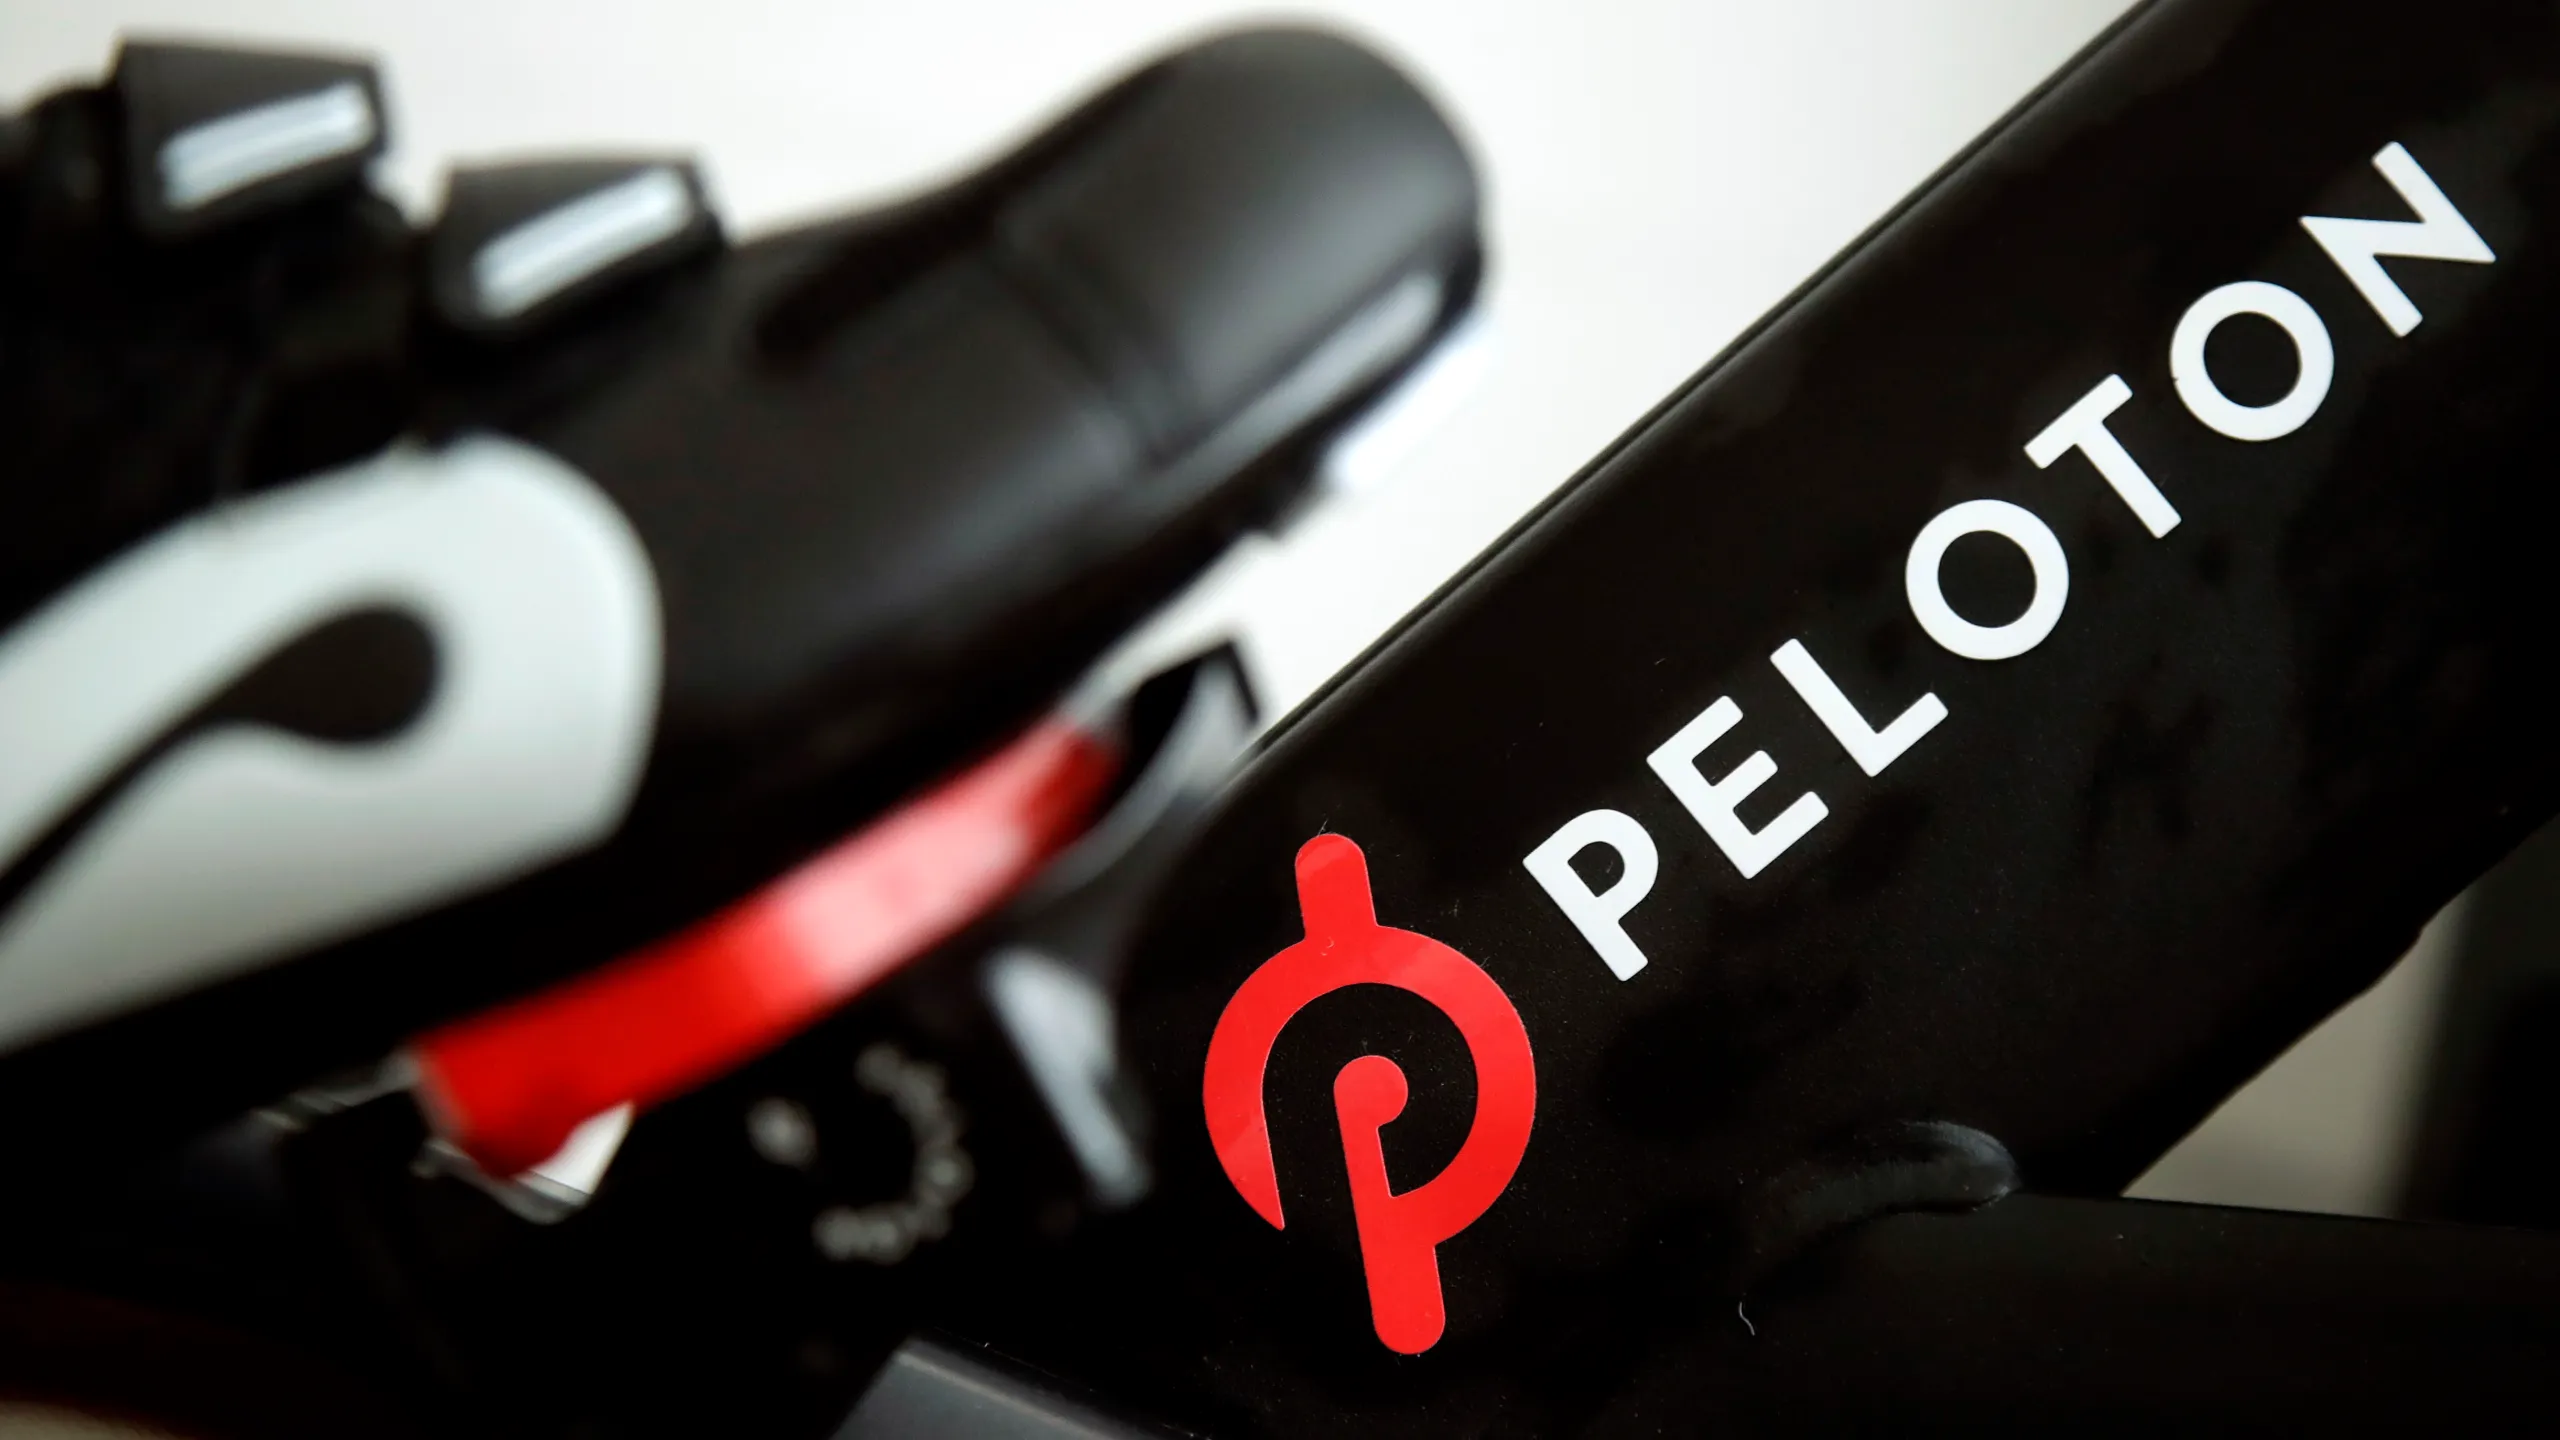 Peloton CEO Barry McCarthy To Resign, 15% Layoffs To Restructure Debt